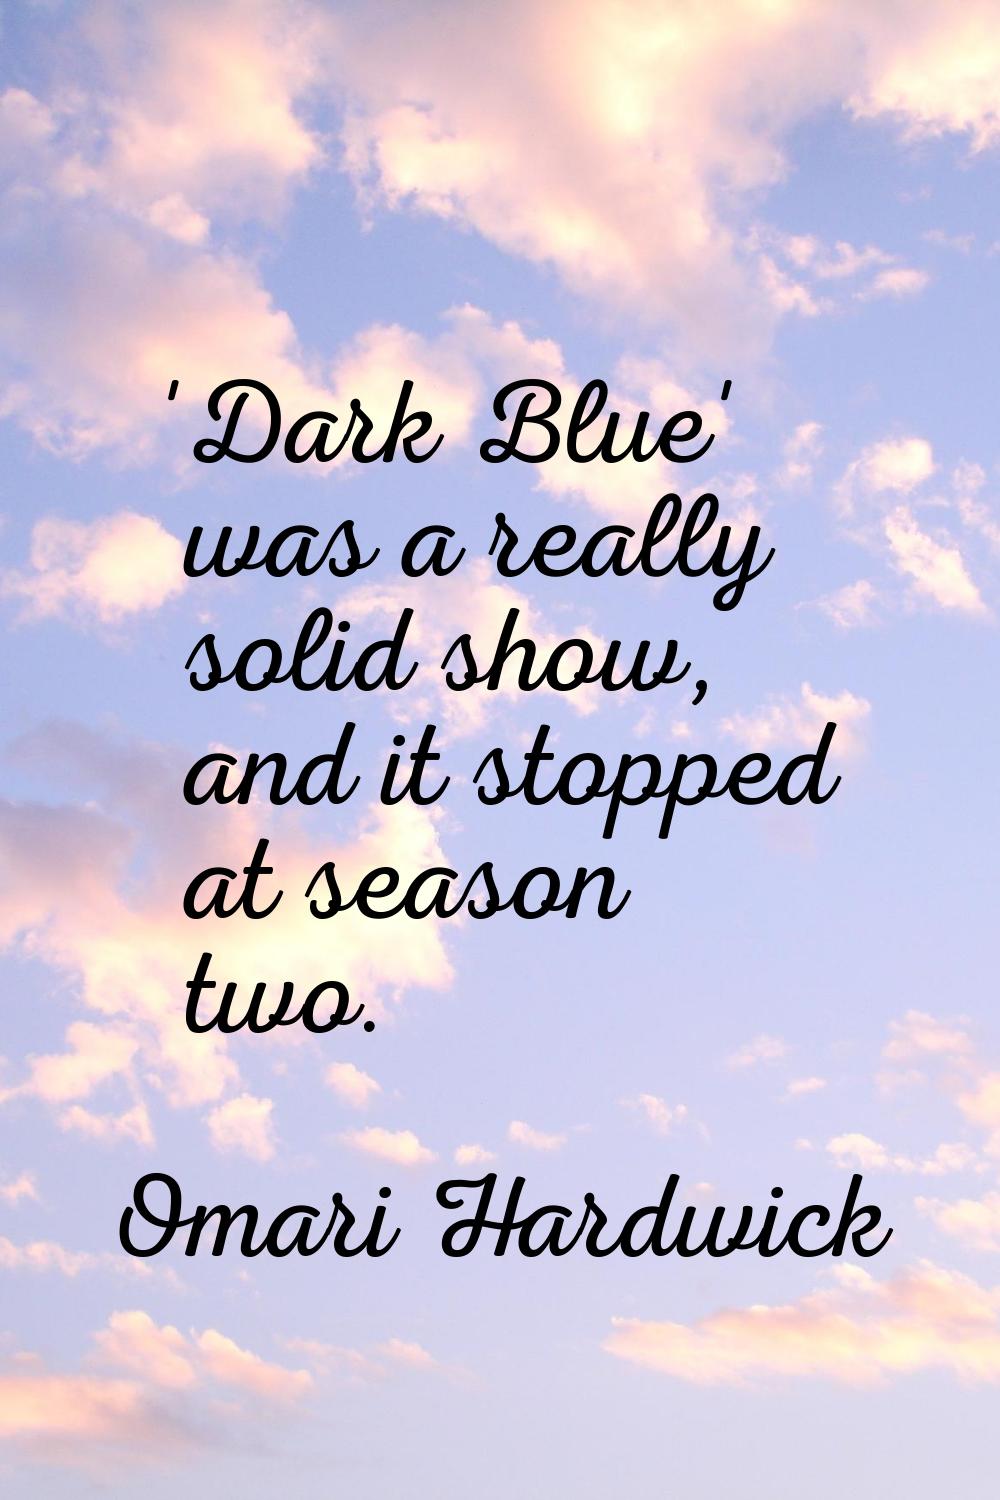 'Dark Blue' was a really solid show, and it stopped at season two.